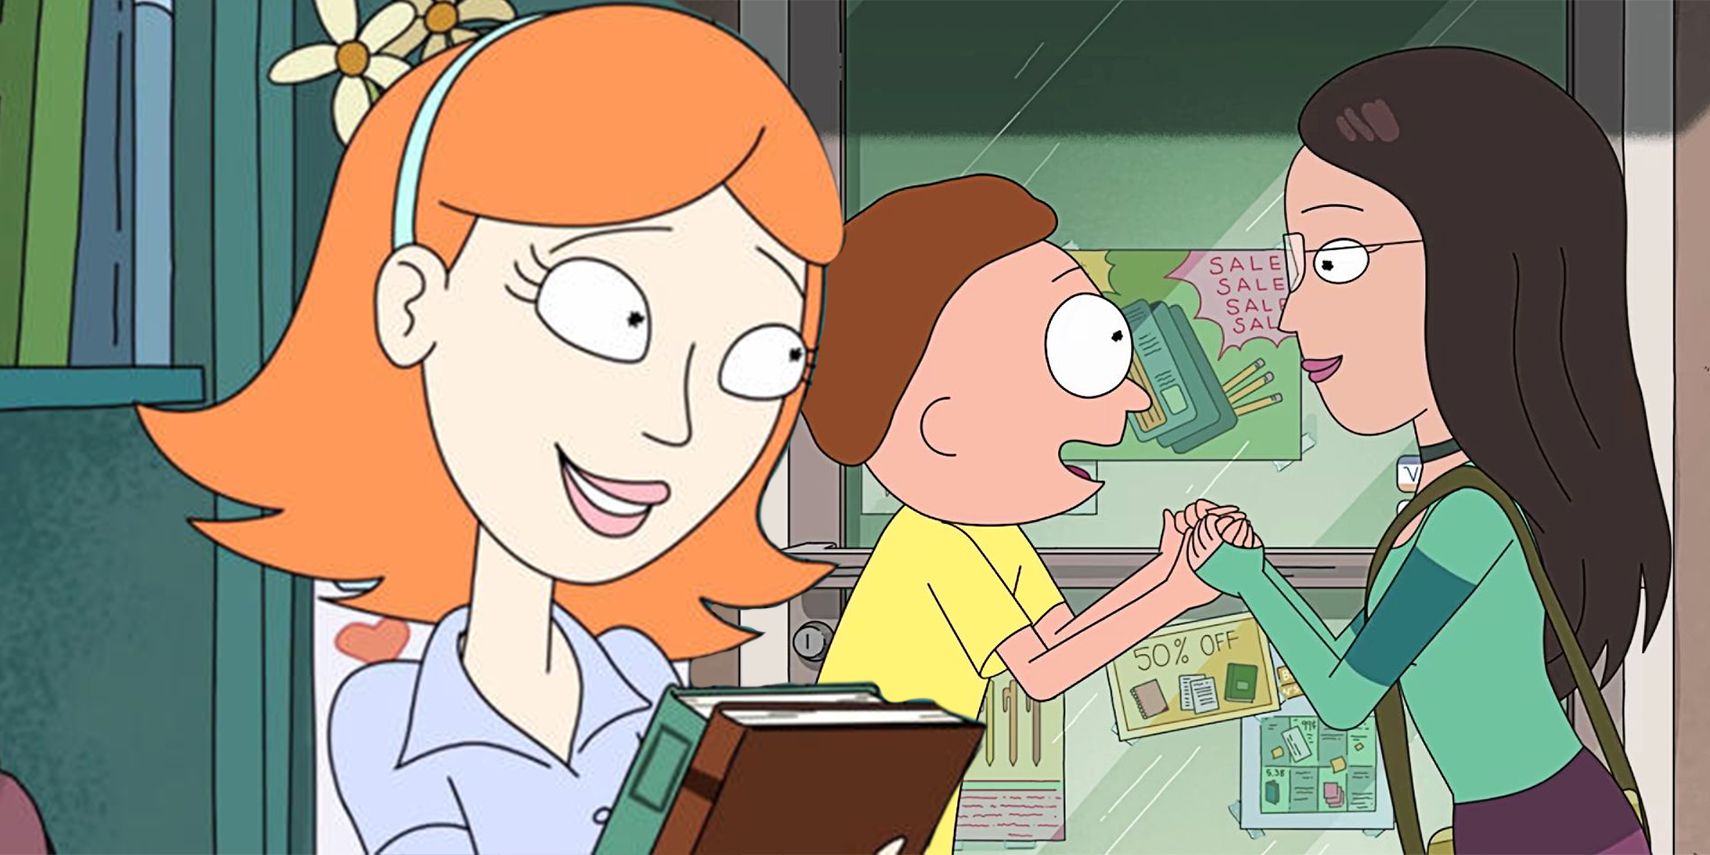 Rick And Morty 5 Reasons Jessica Is A Good Match For Morty And 3 Better Options For Him